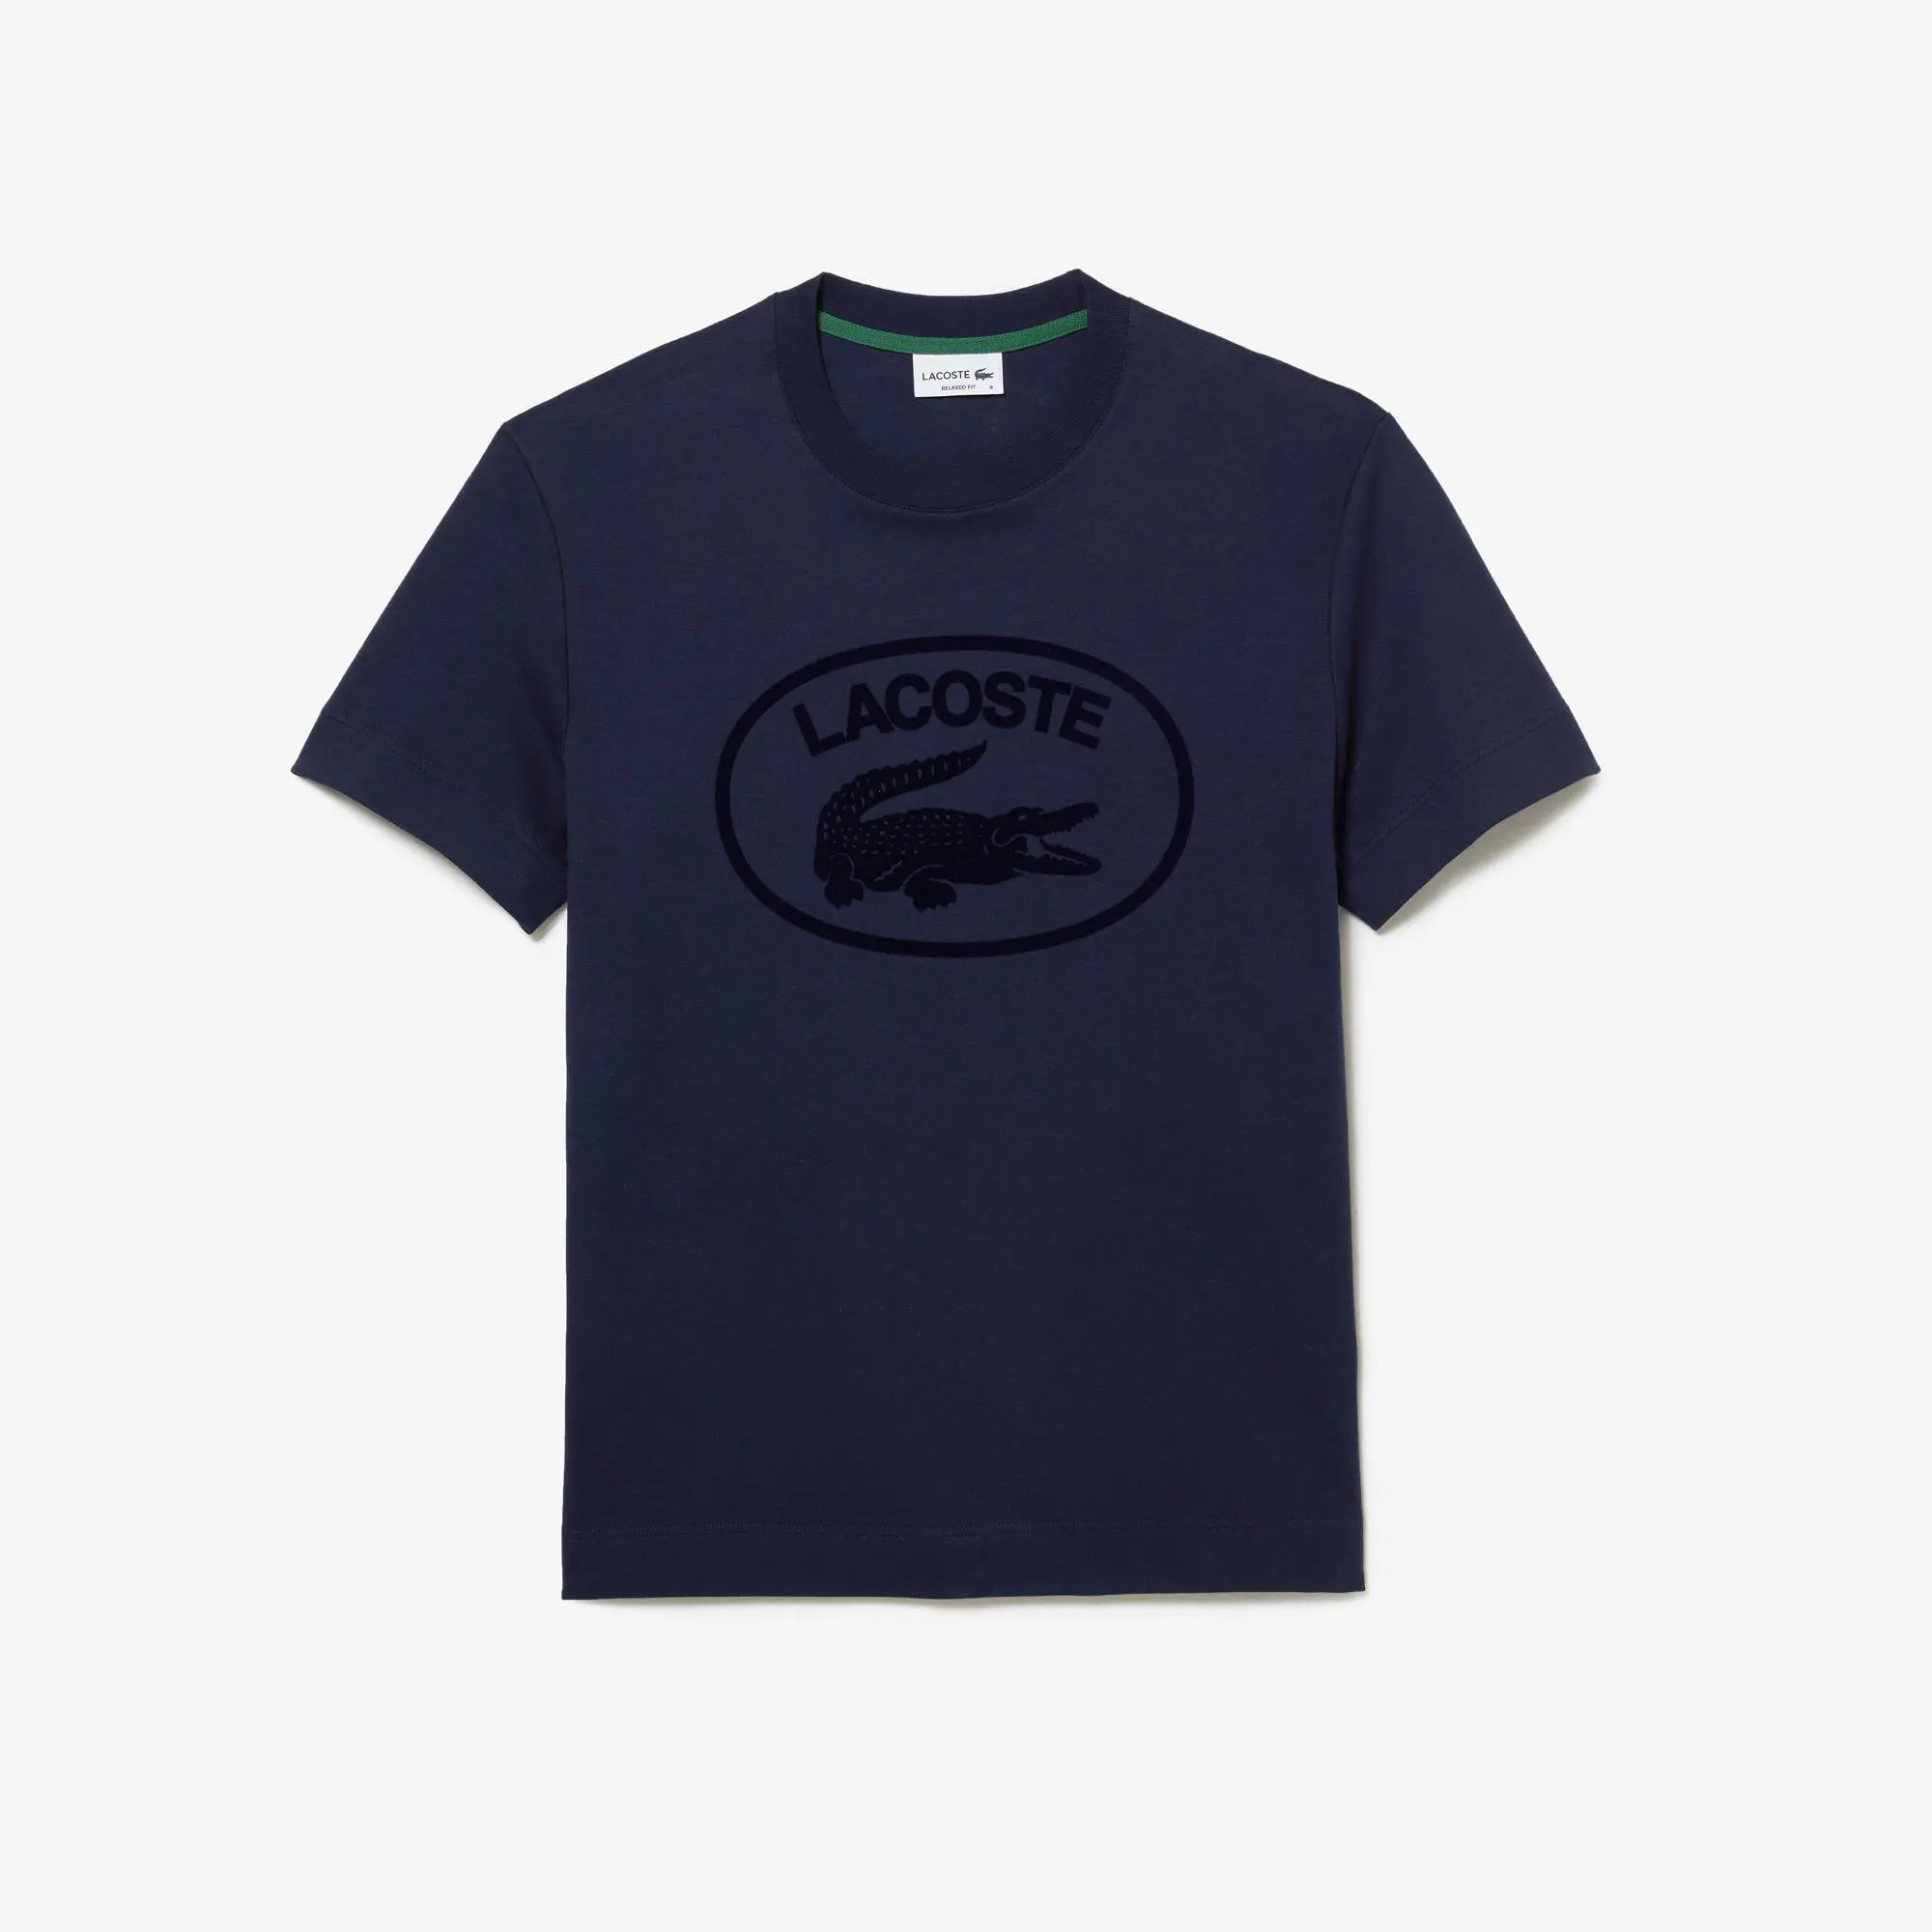 Lacoste Men's Lacoste Relaxed Fit Branded Cotton T-Shirt. 2